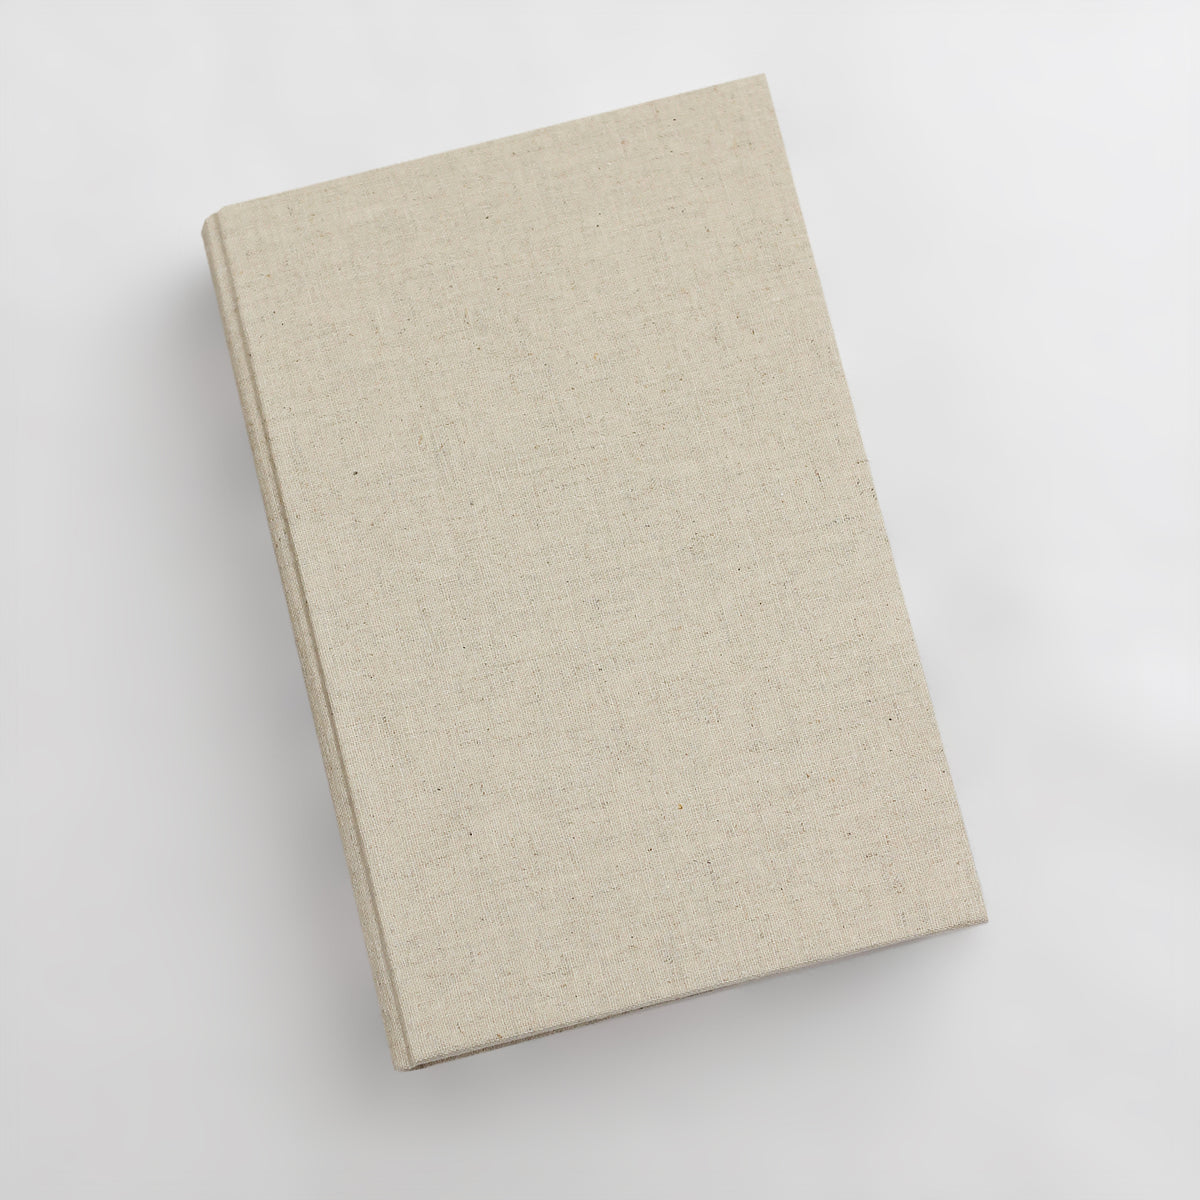 Medium 5.5x8.5 Blank Page Journal | Cover: Natural Linen | Available Personalized